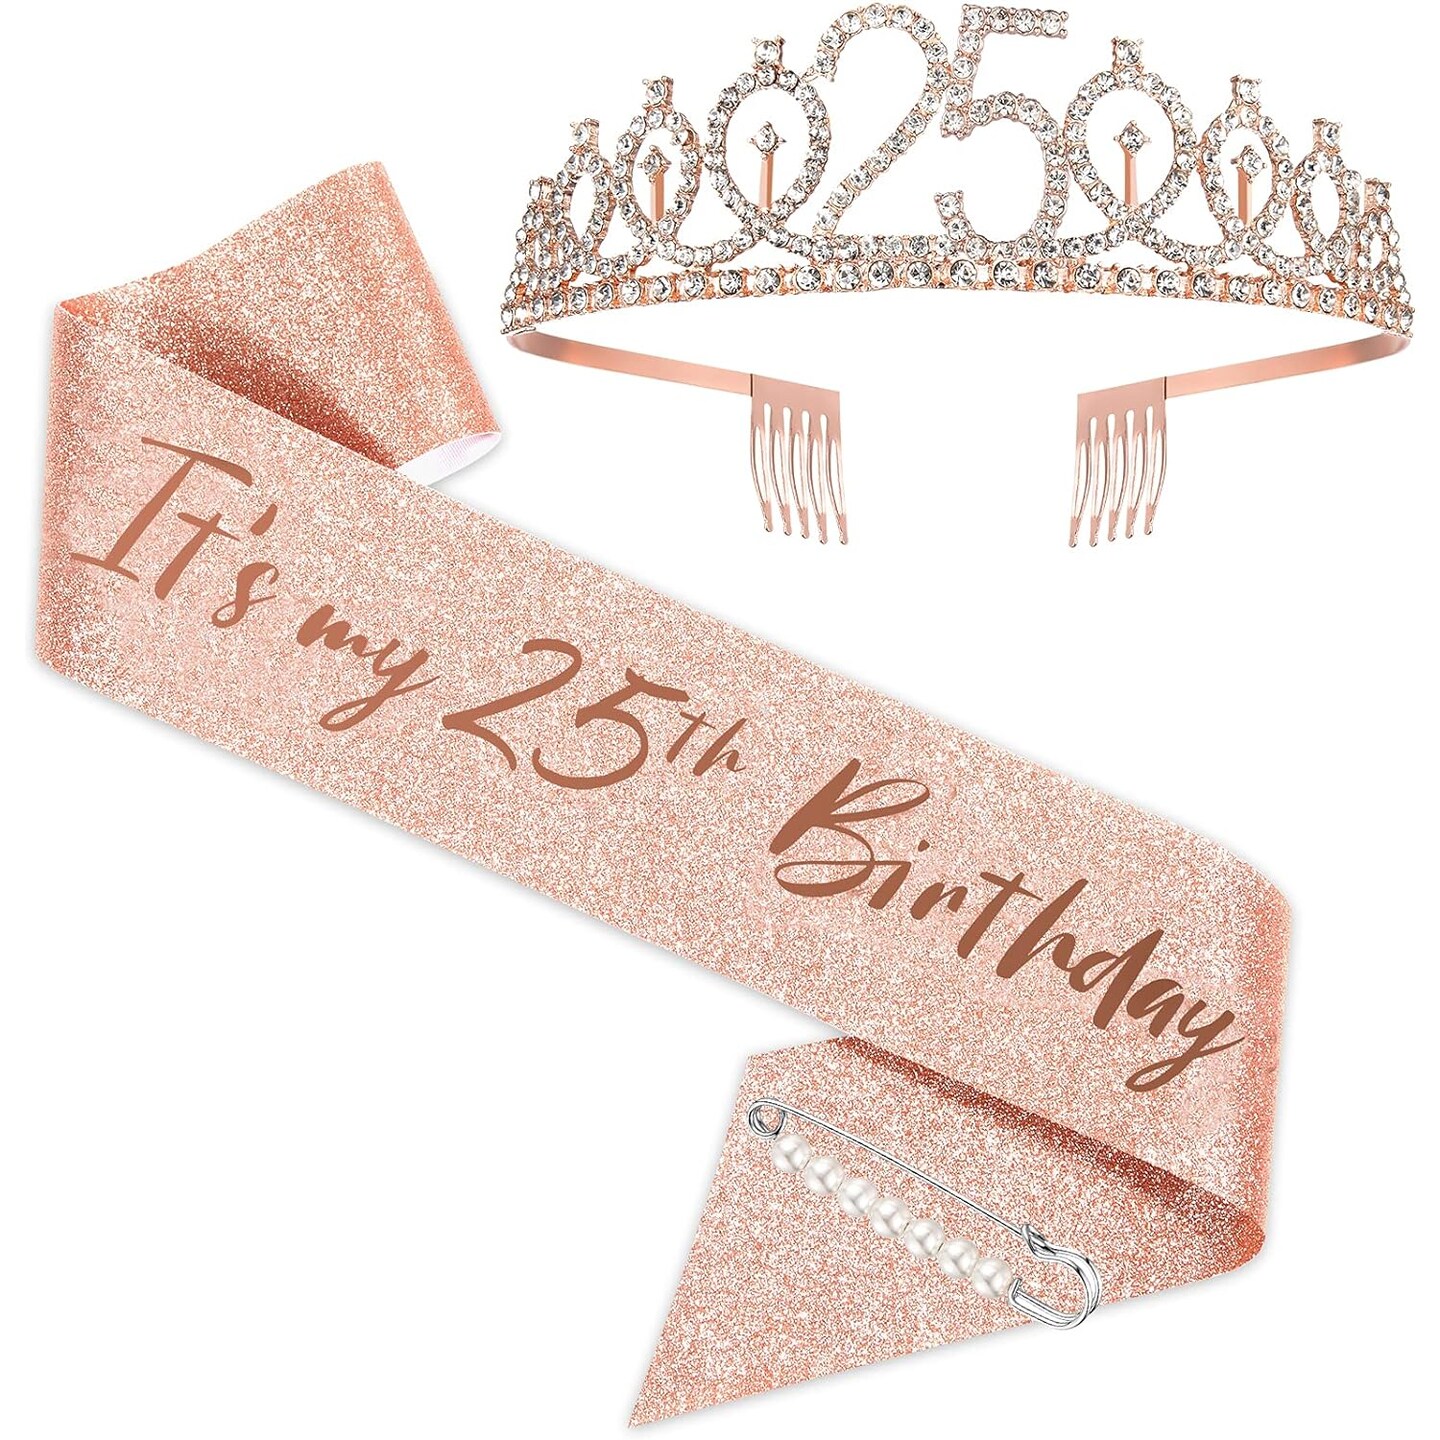 25th Birthday Sash and Tiara for Women, Rose Gold Birthday Sash Crown 25 &#x26; Fabulous Sash and Tiara for Women, 25th Birthday Gifts for Happy 25th Birthday Party Favor Supplies